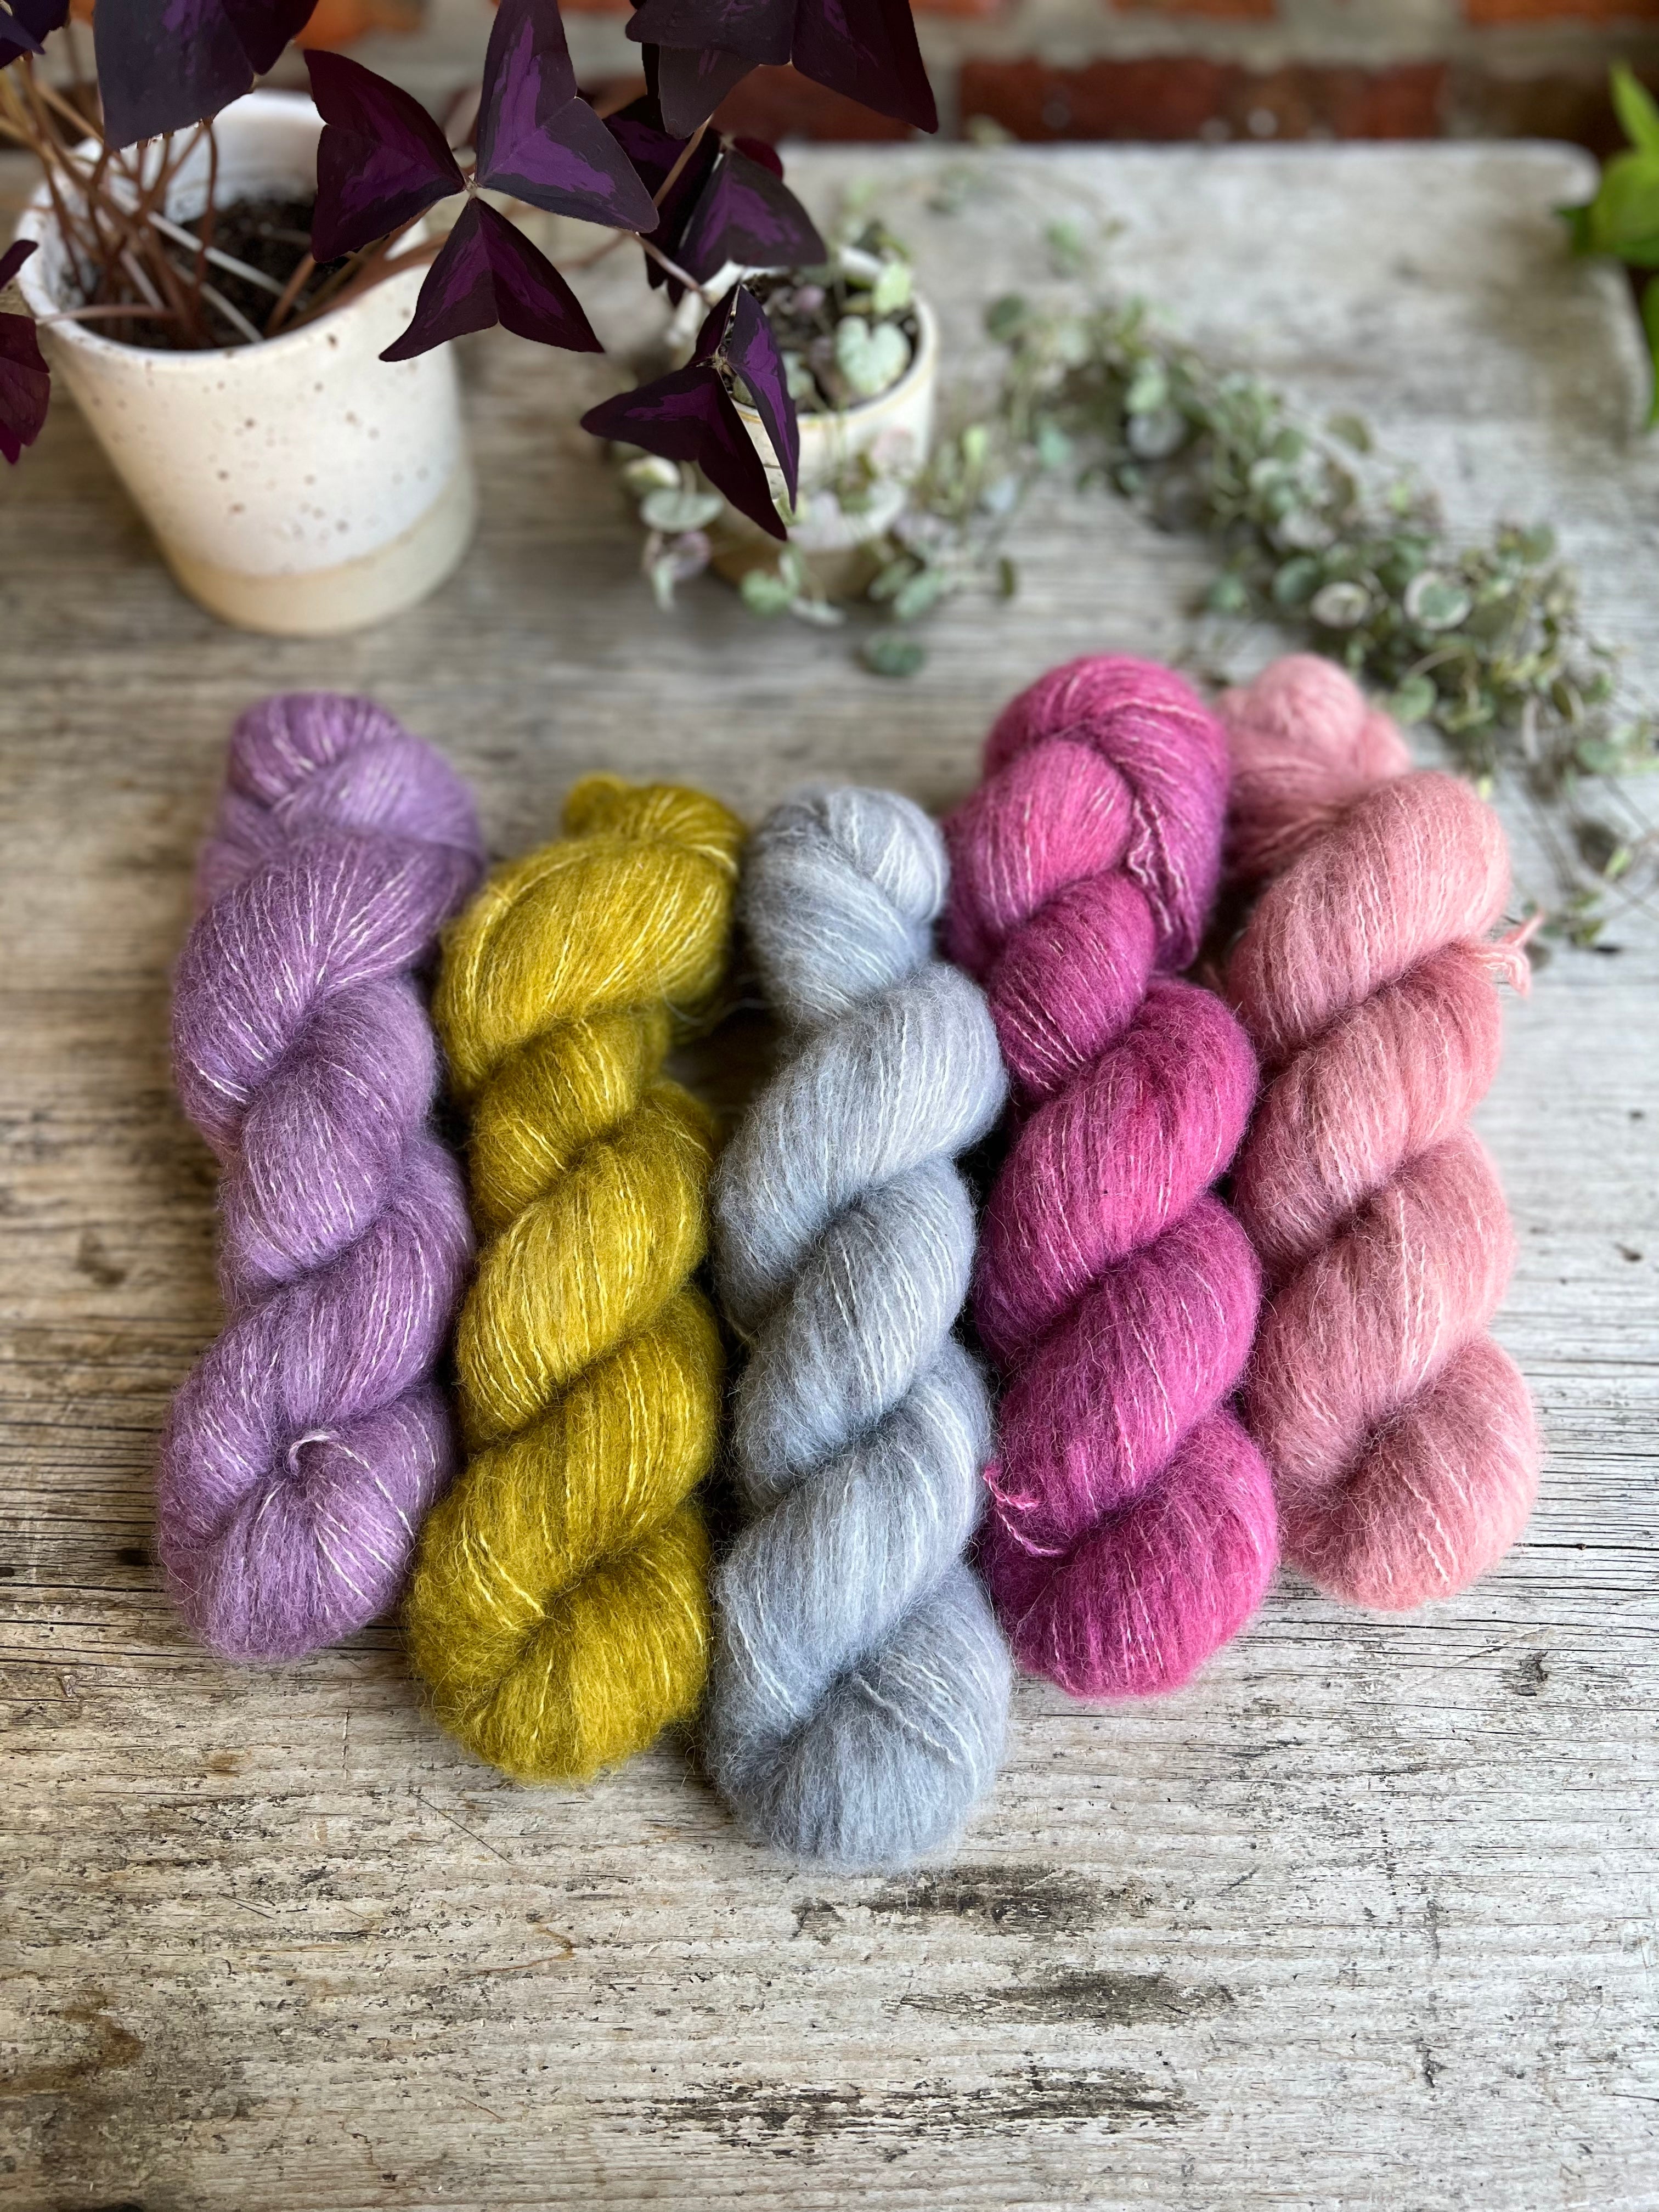 Introducing Natural Fluff 4ply